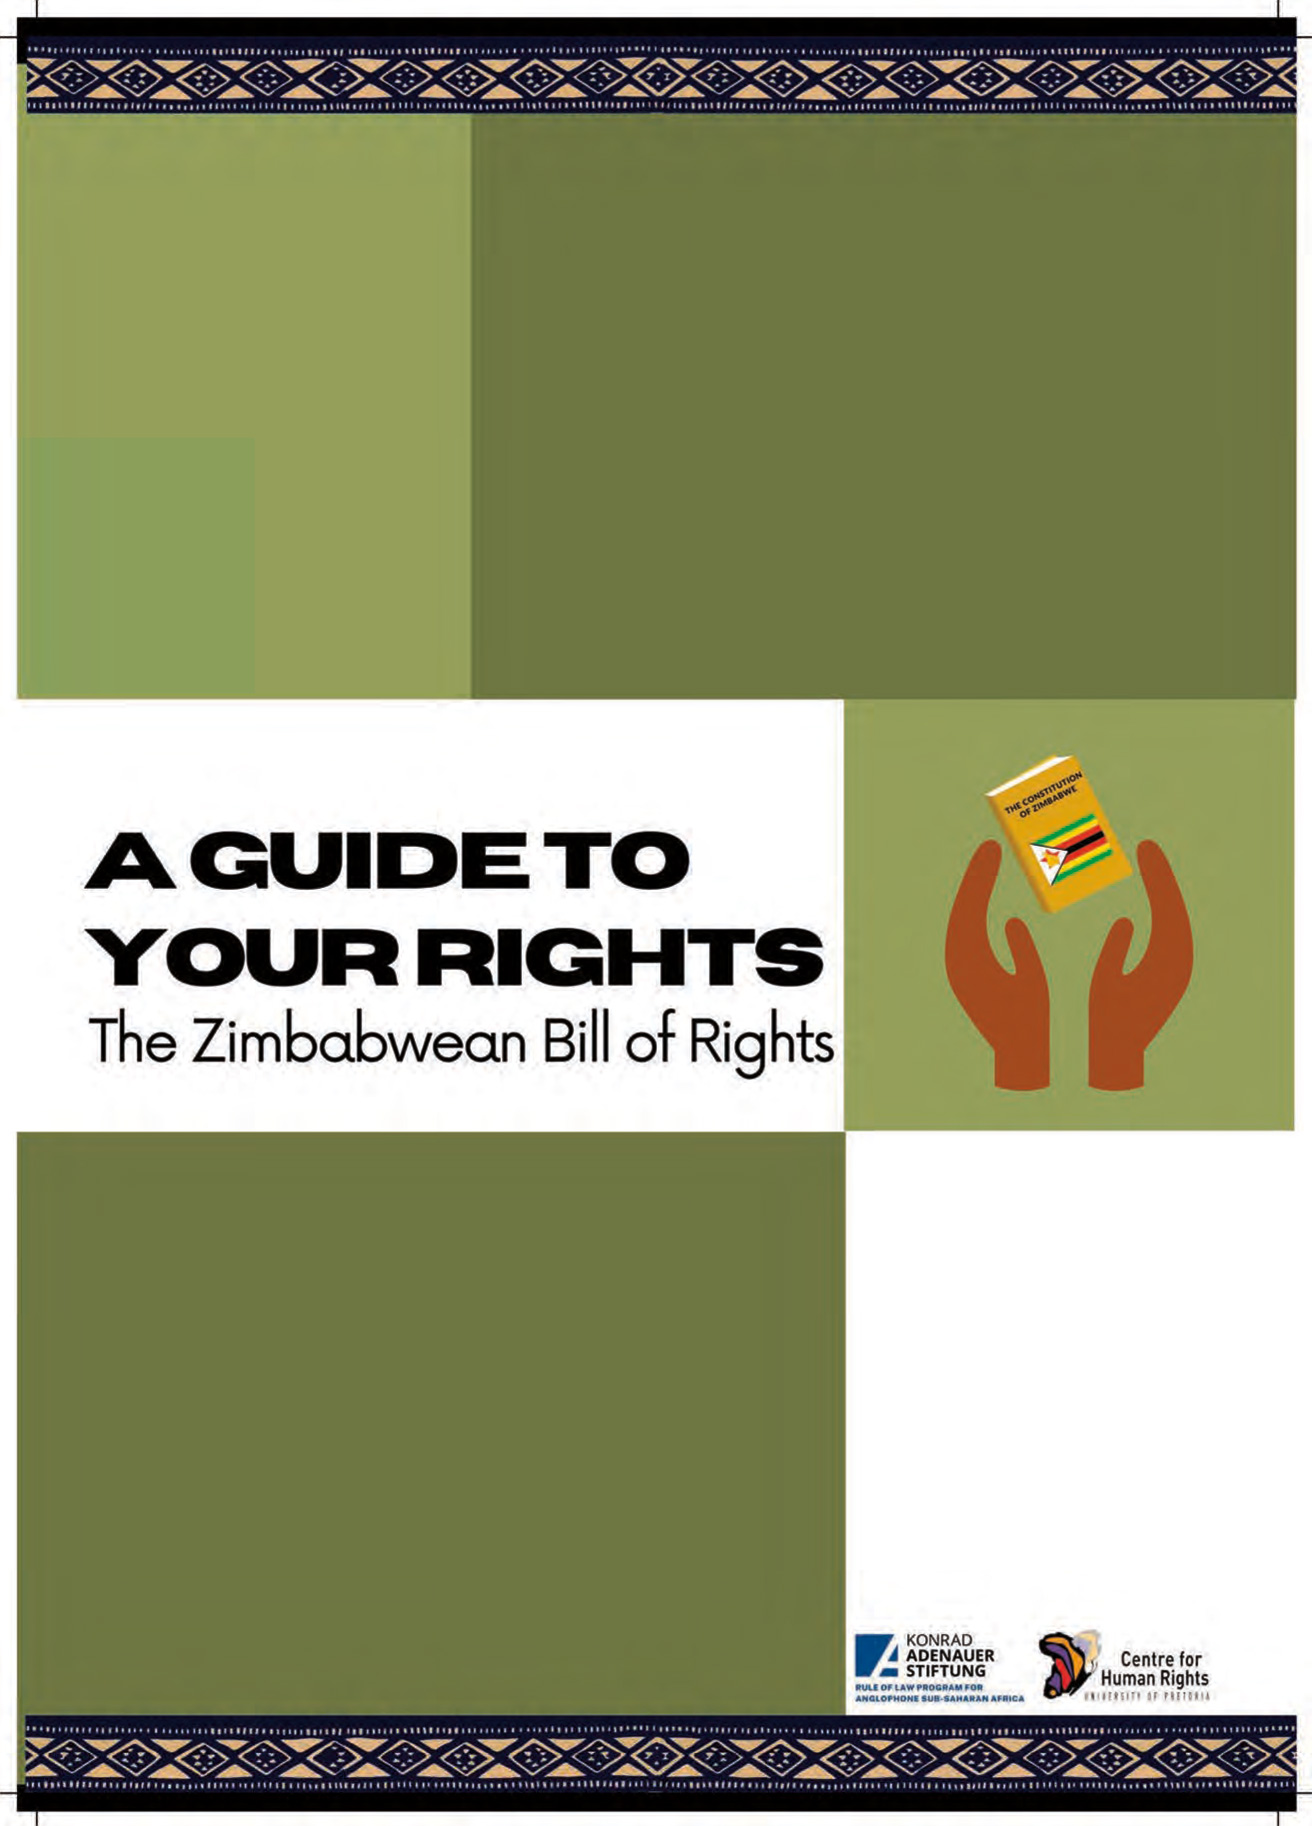 A Guide to Your Rights The Zimbabwean Bill Of Rights English Booklet 1